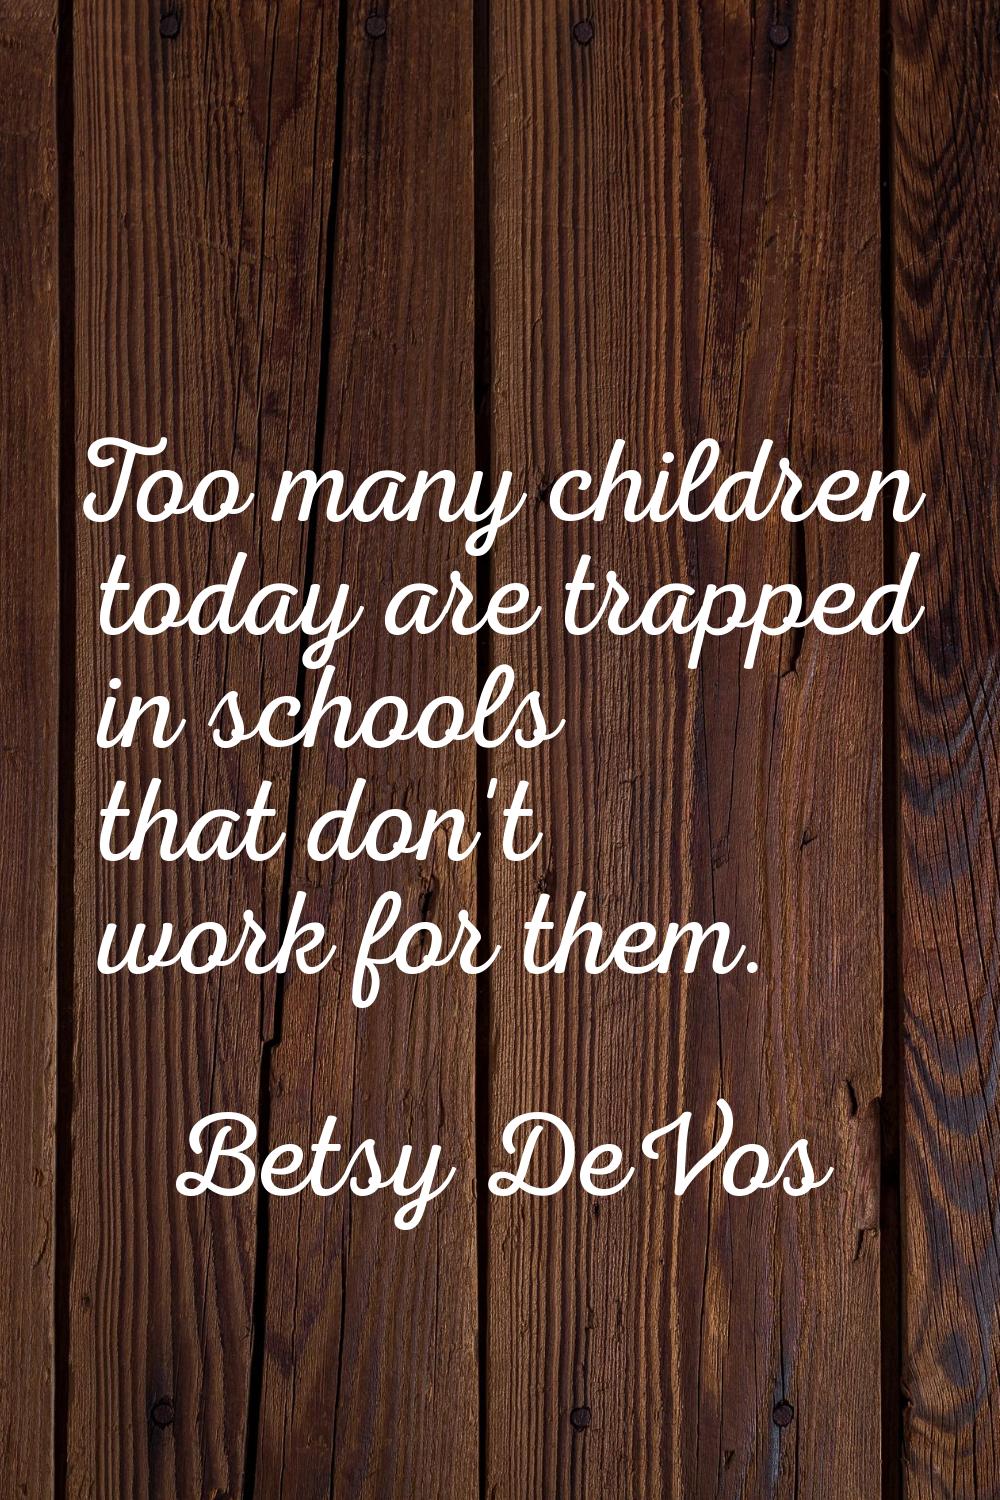 Too many children today are trapped in schools that don't work for them.